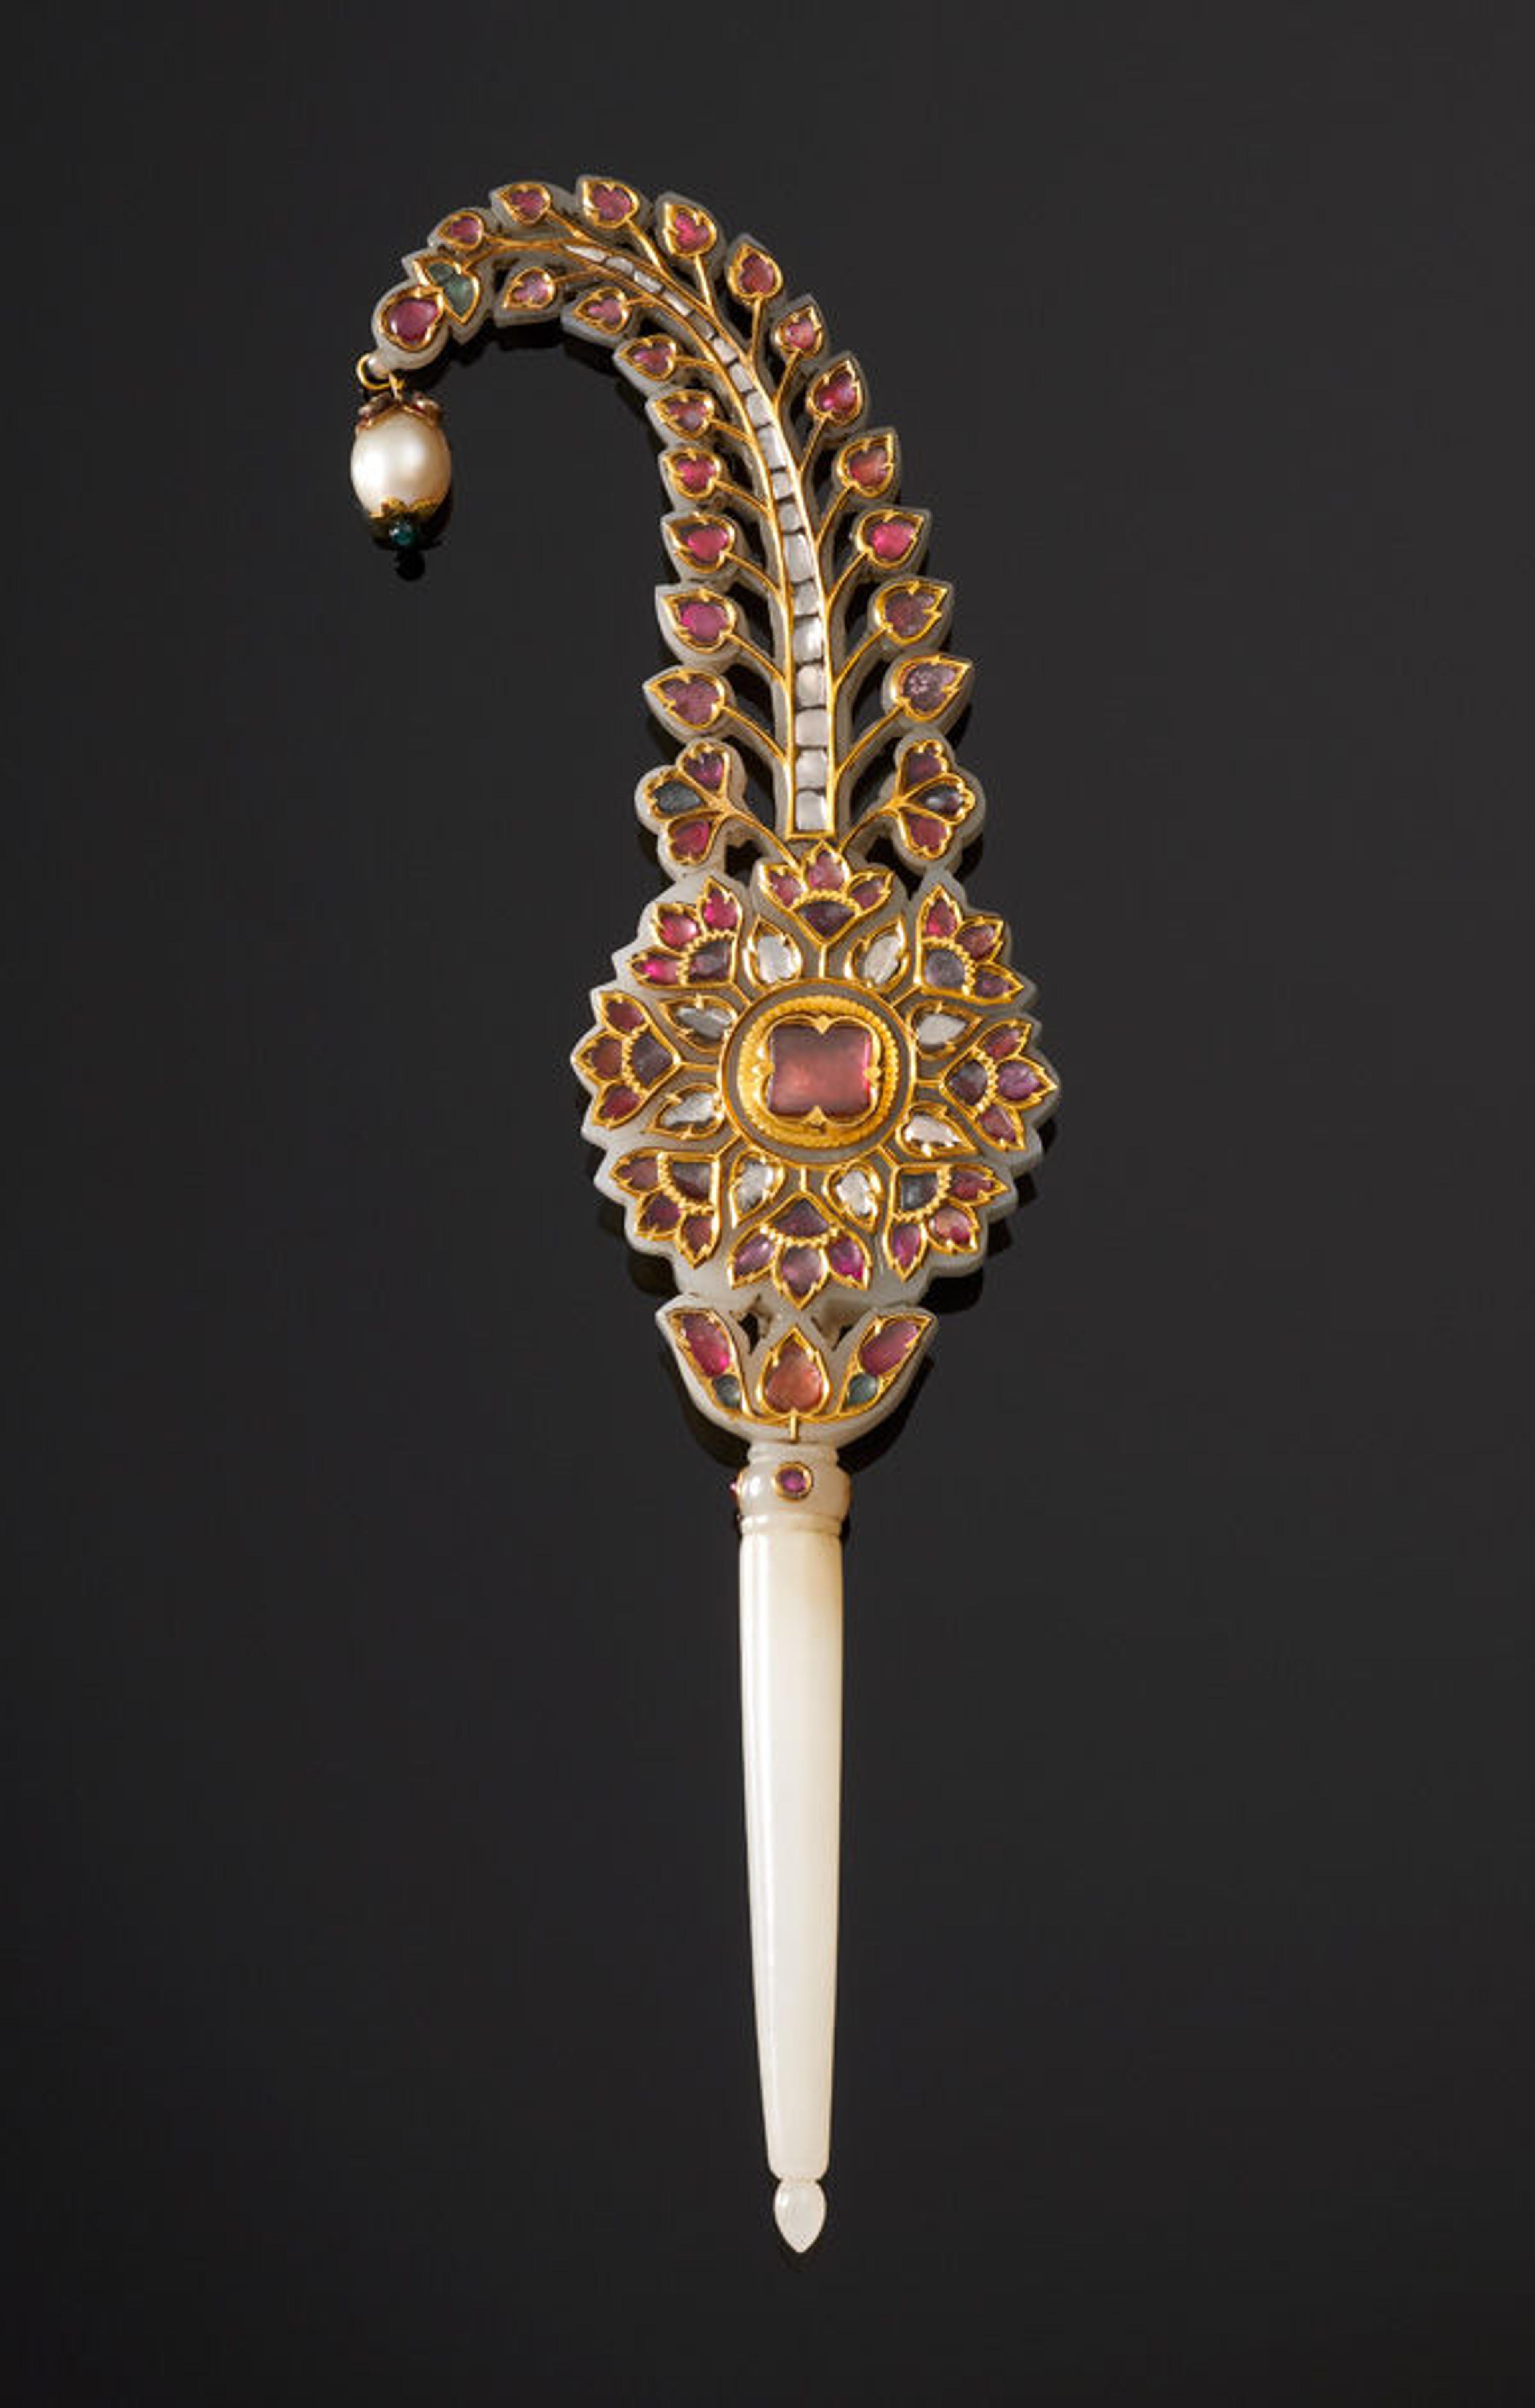 Turban Ornament (jigha), 1675–1725. North India or Deccan. Jade, inlaid with diamonds, rubies, and emeralds; with hanging pearl; H. 7 3/4 in. (19.6 cm), W. 1 3/4 in. (4.5 cm). The Al-Thani Collection